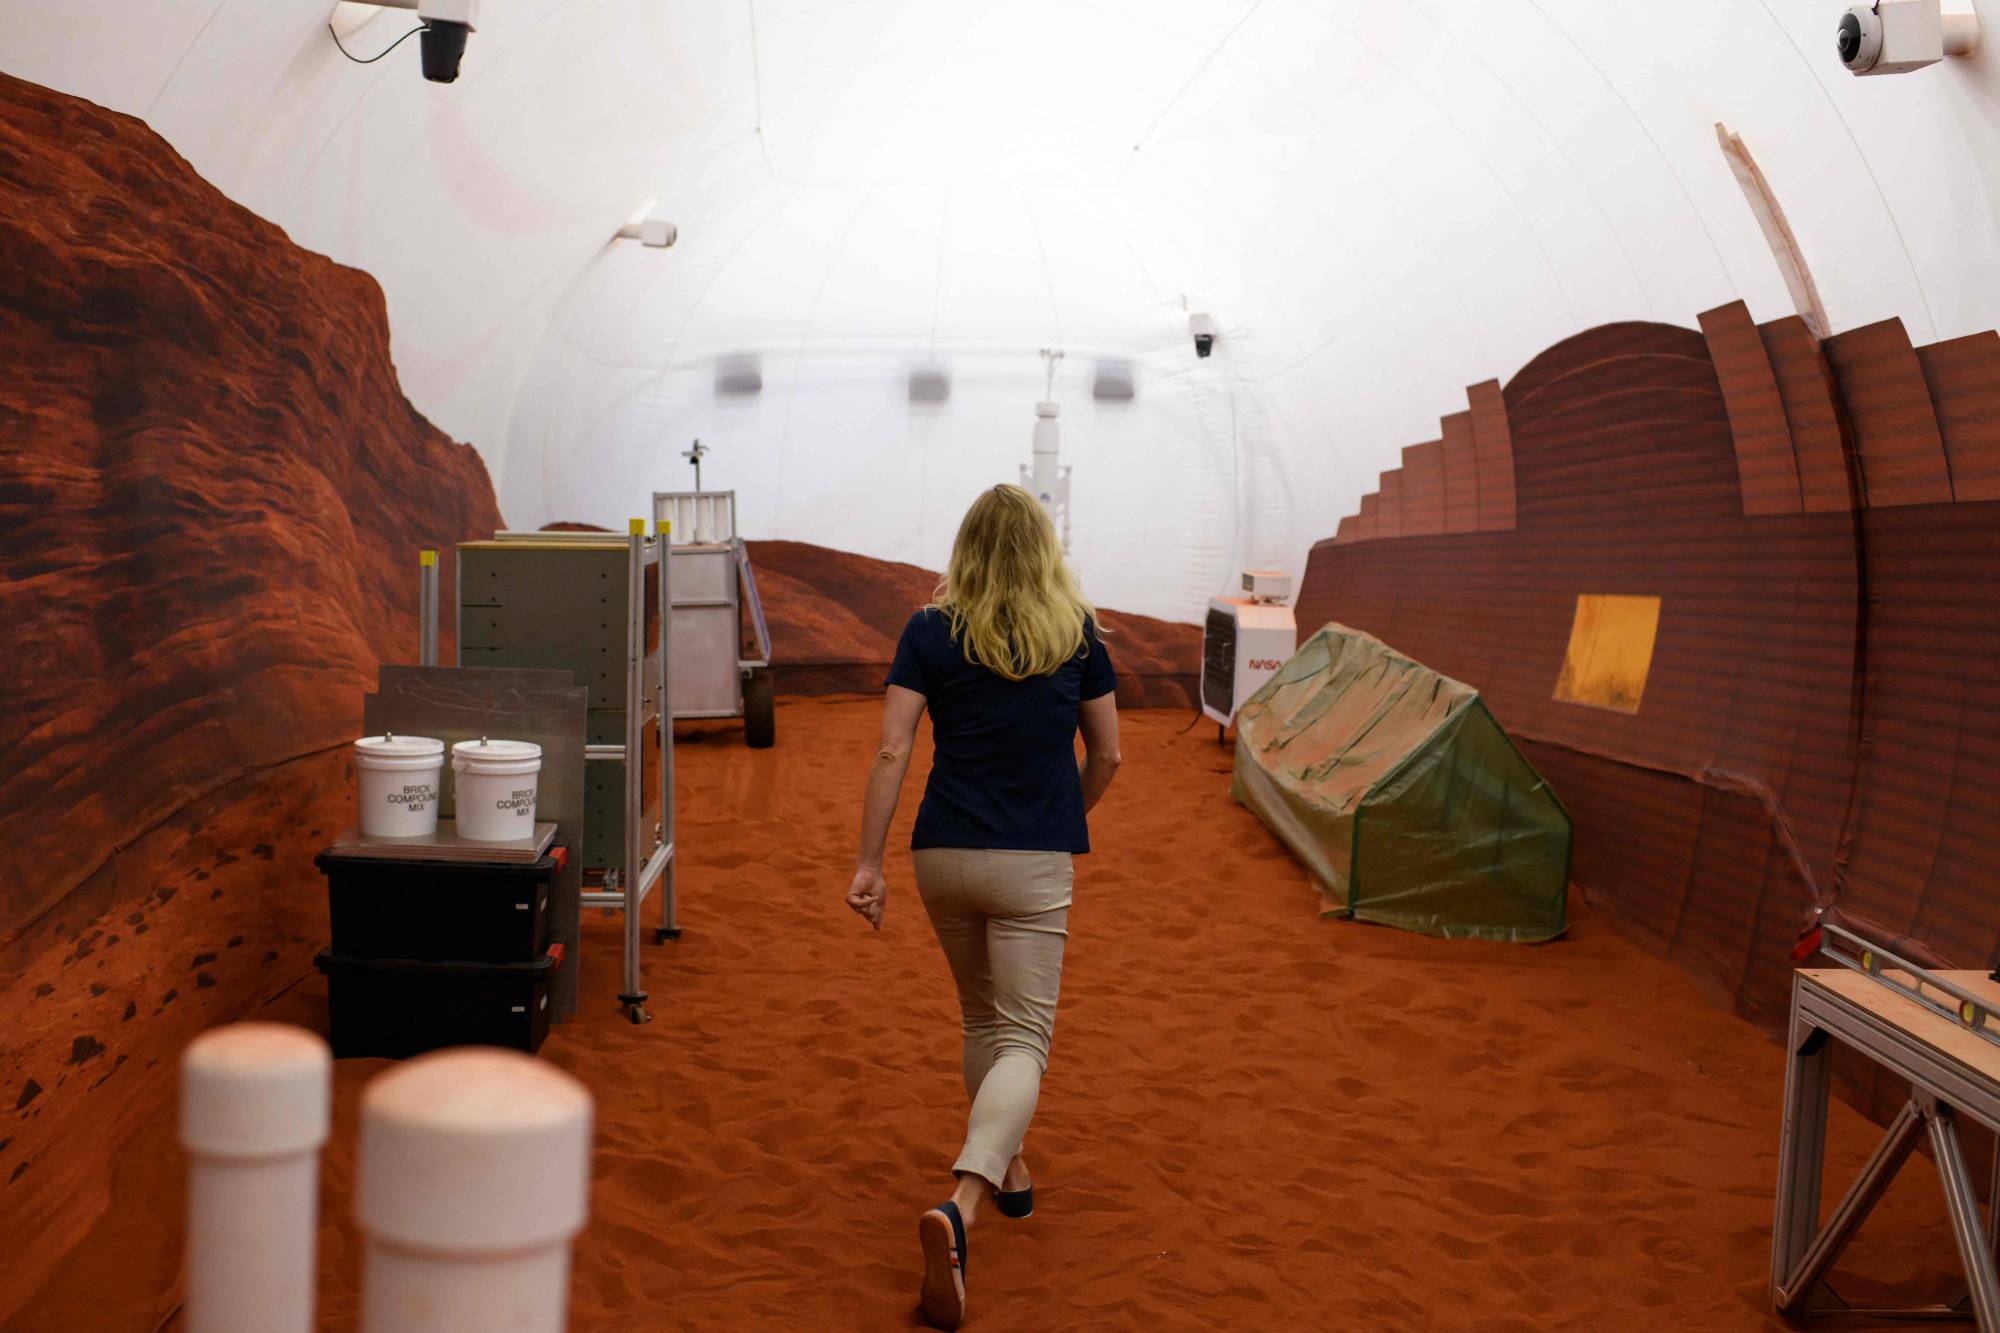 Meet one of the volunteers who will spend a year on ‘Mars’